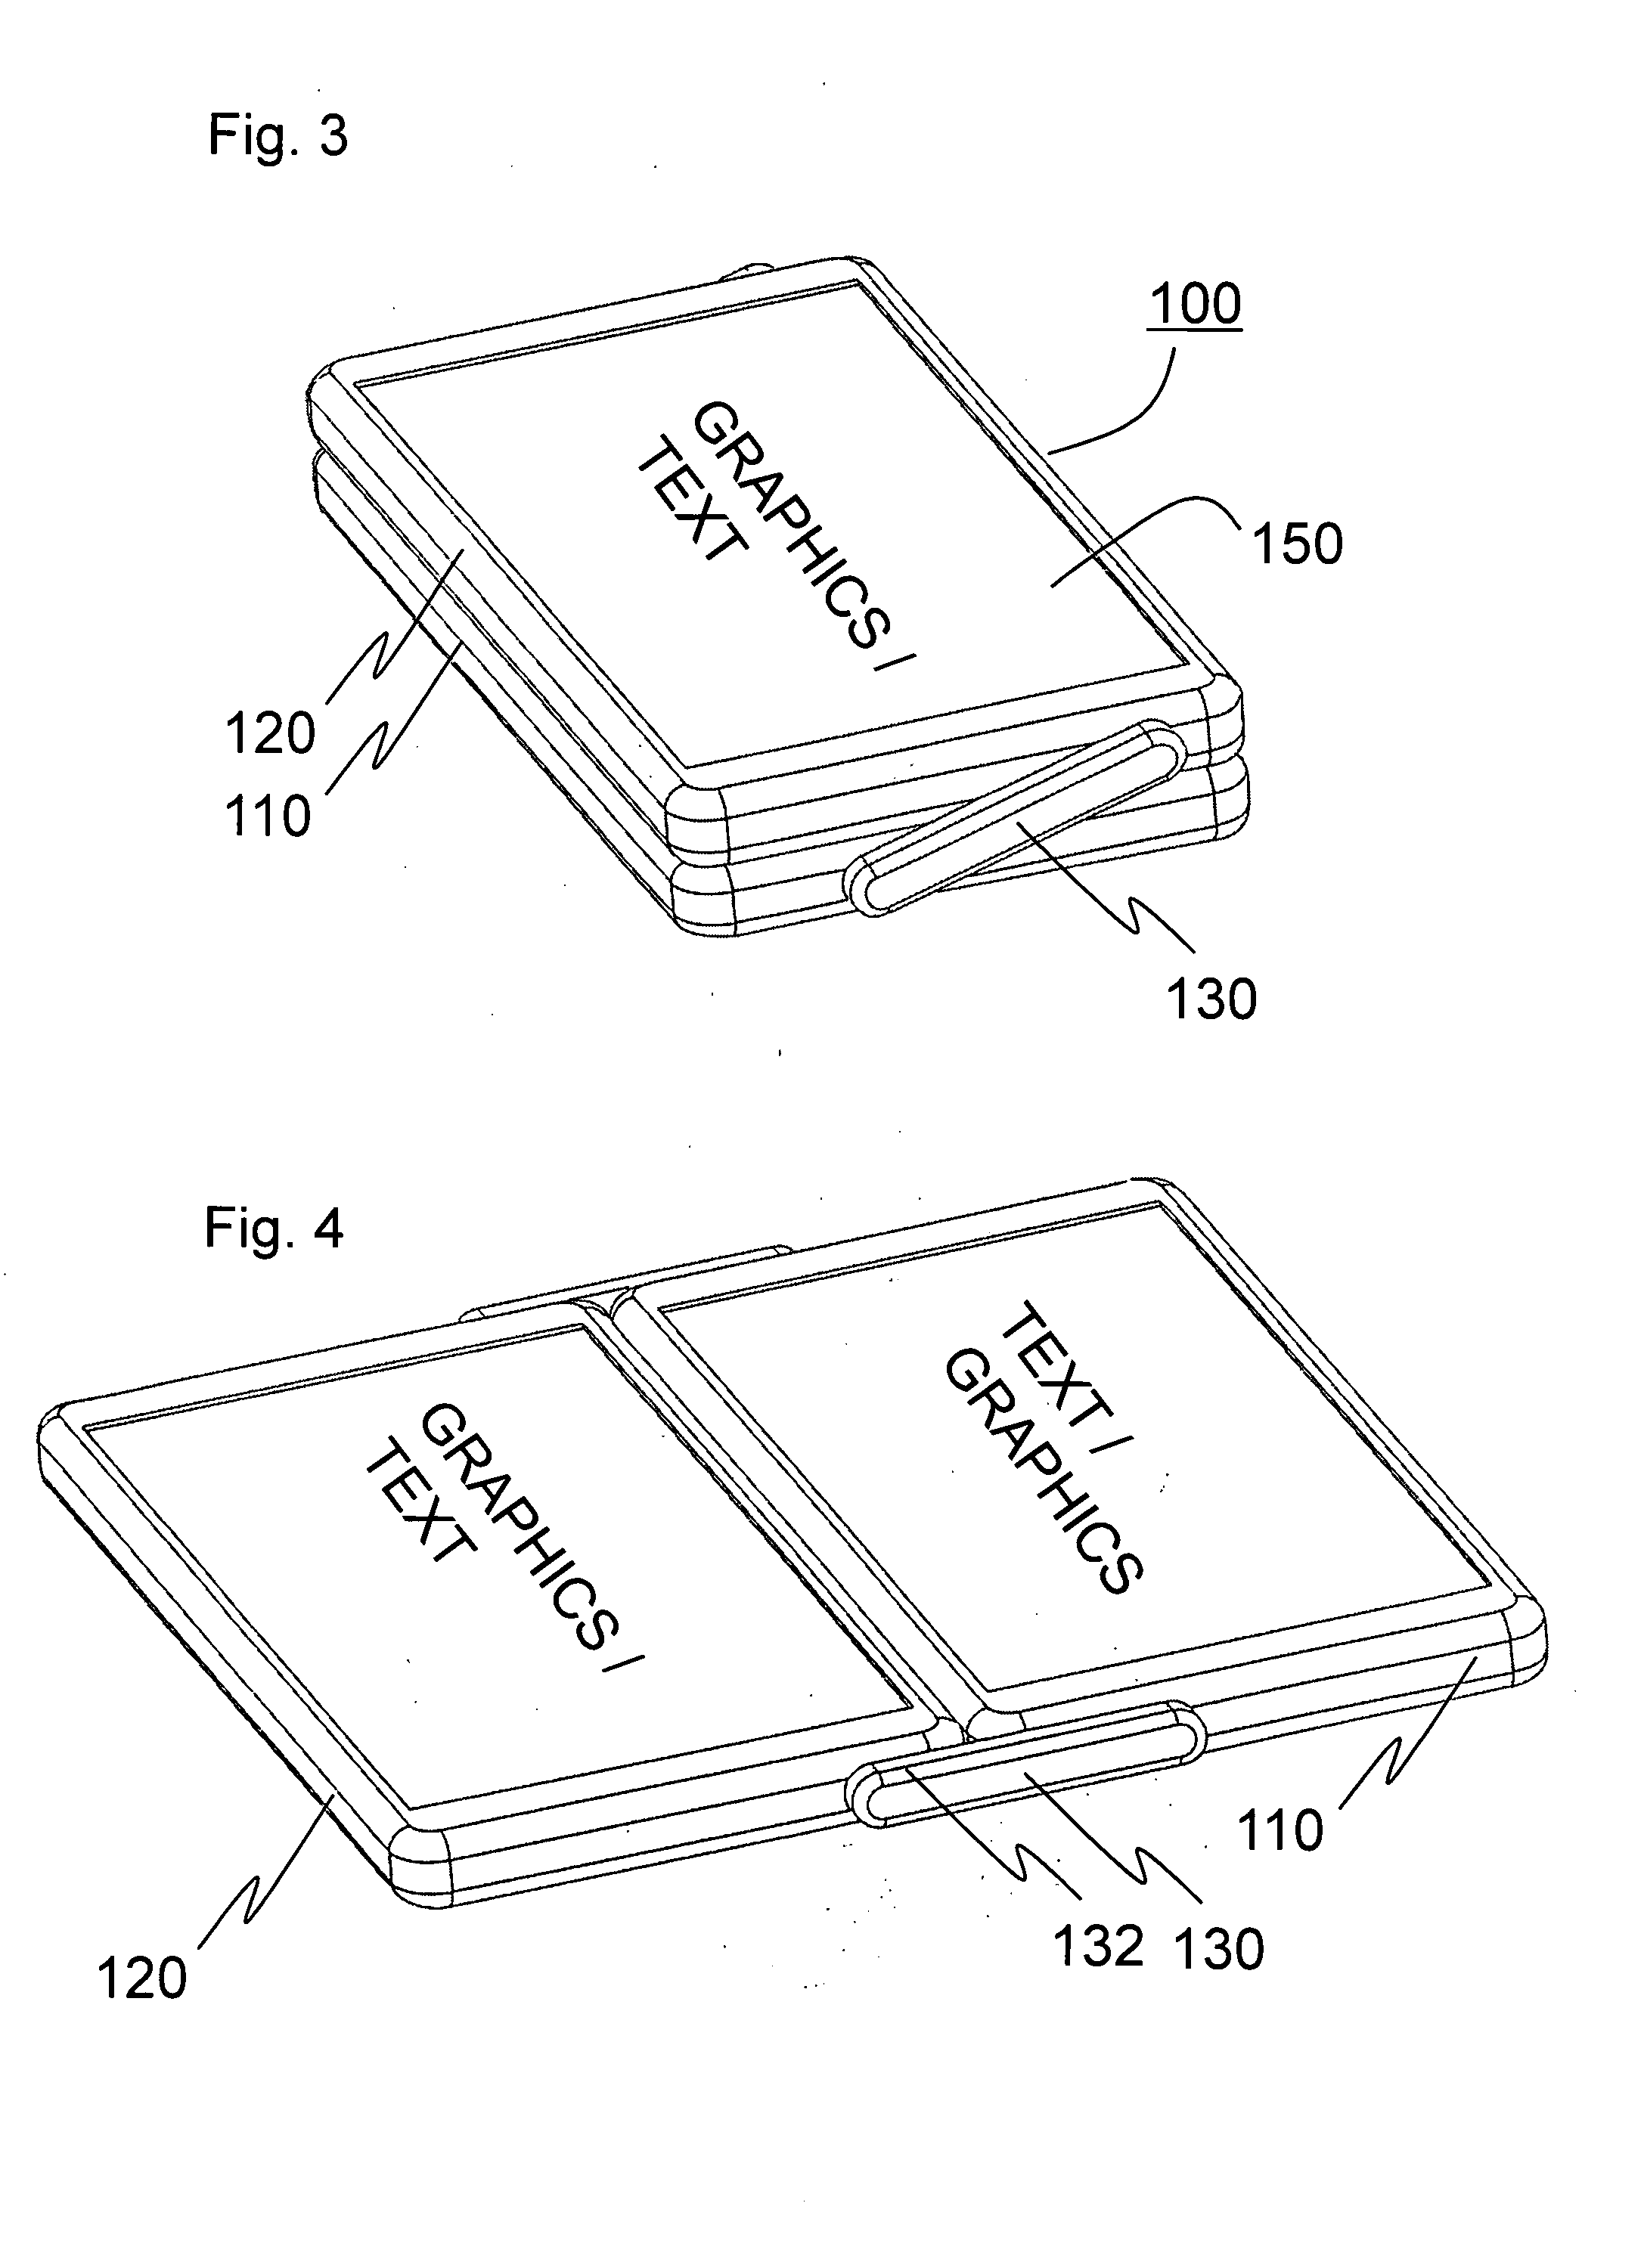 Handheld device with a user interface